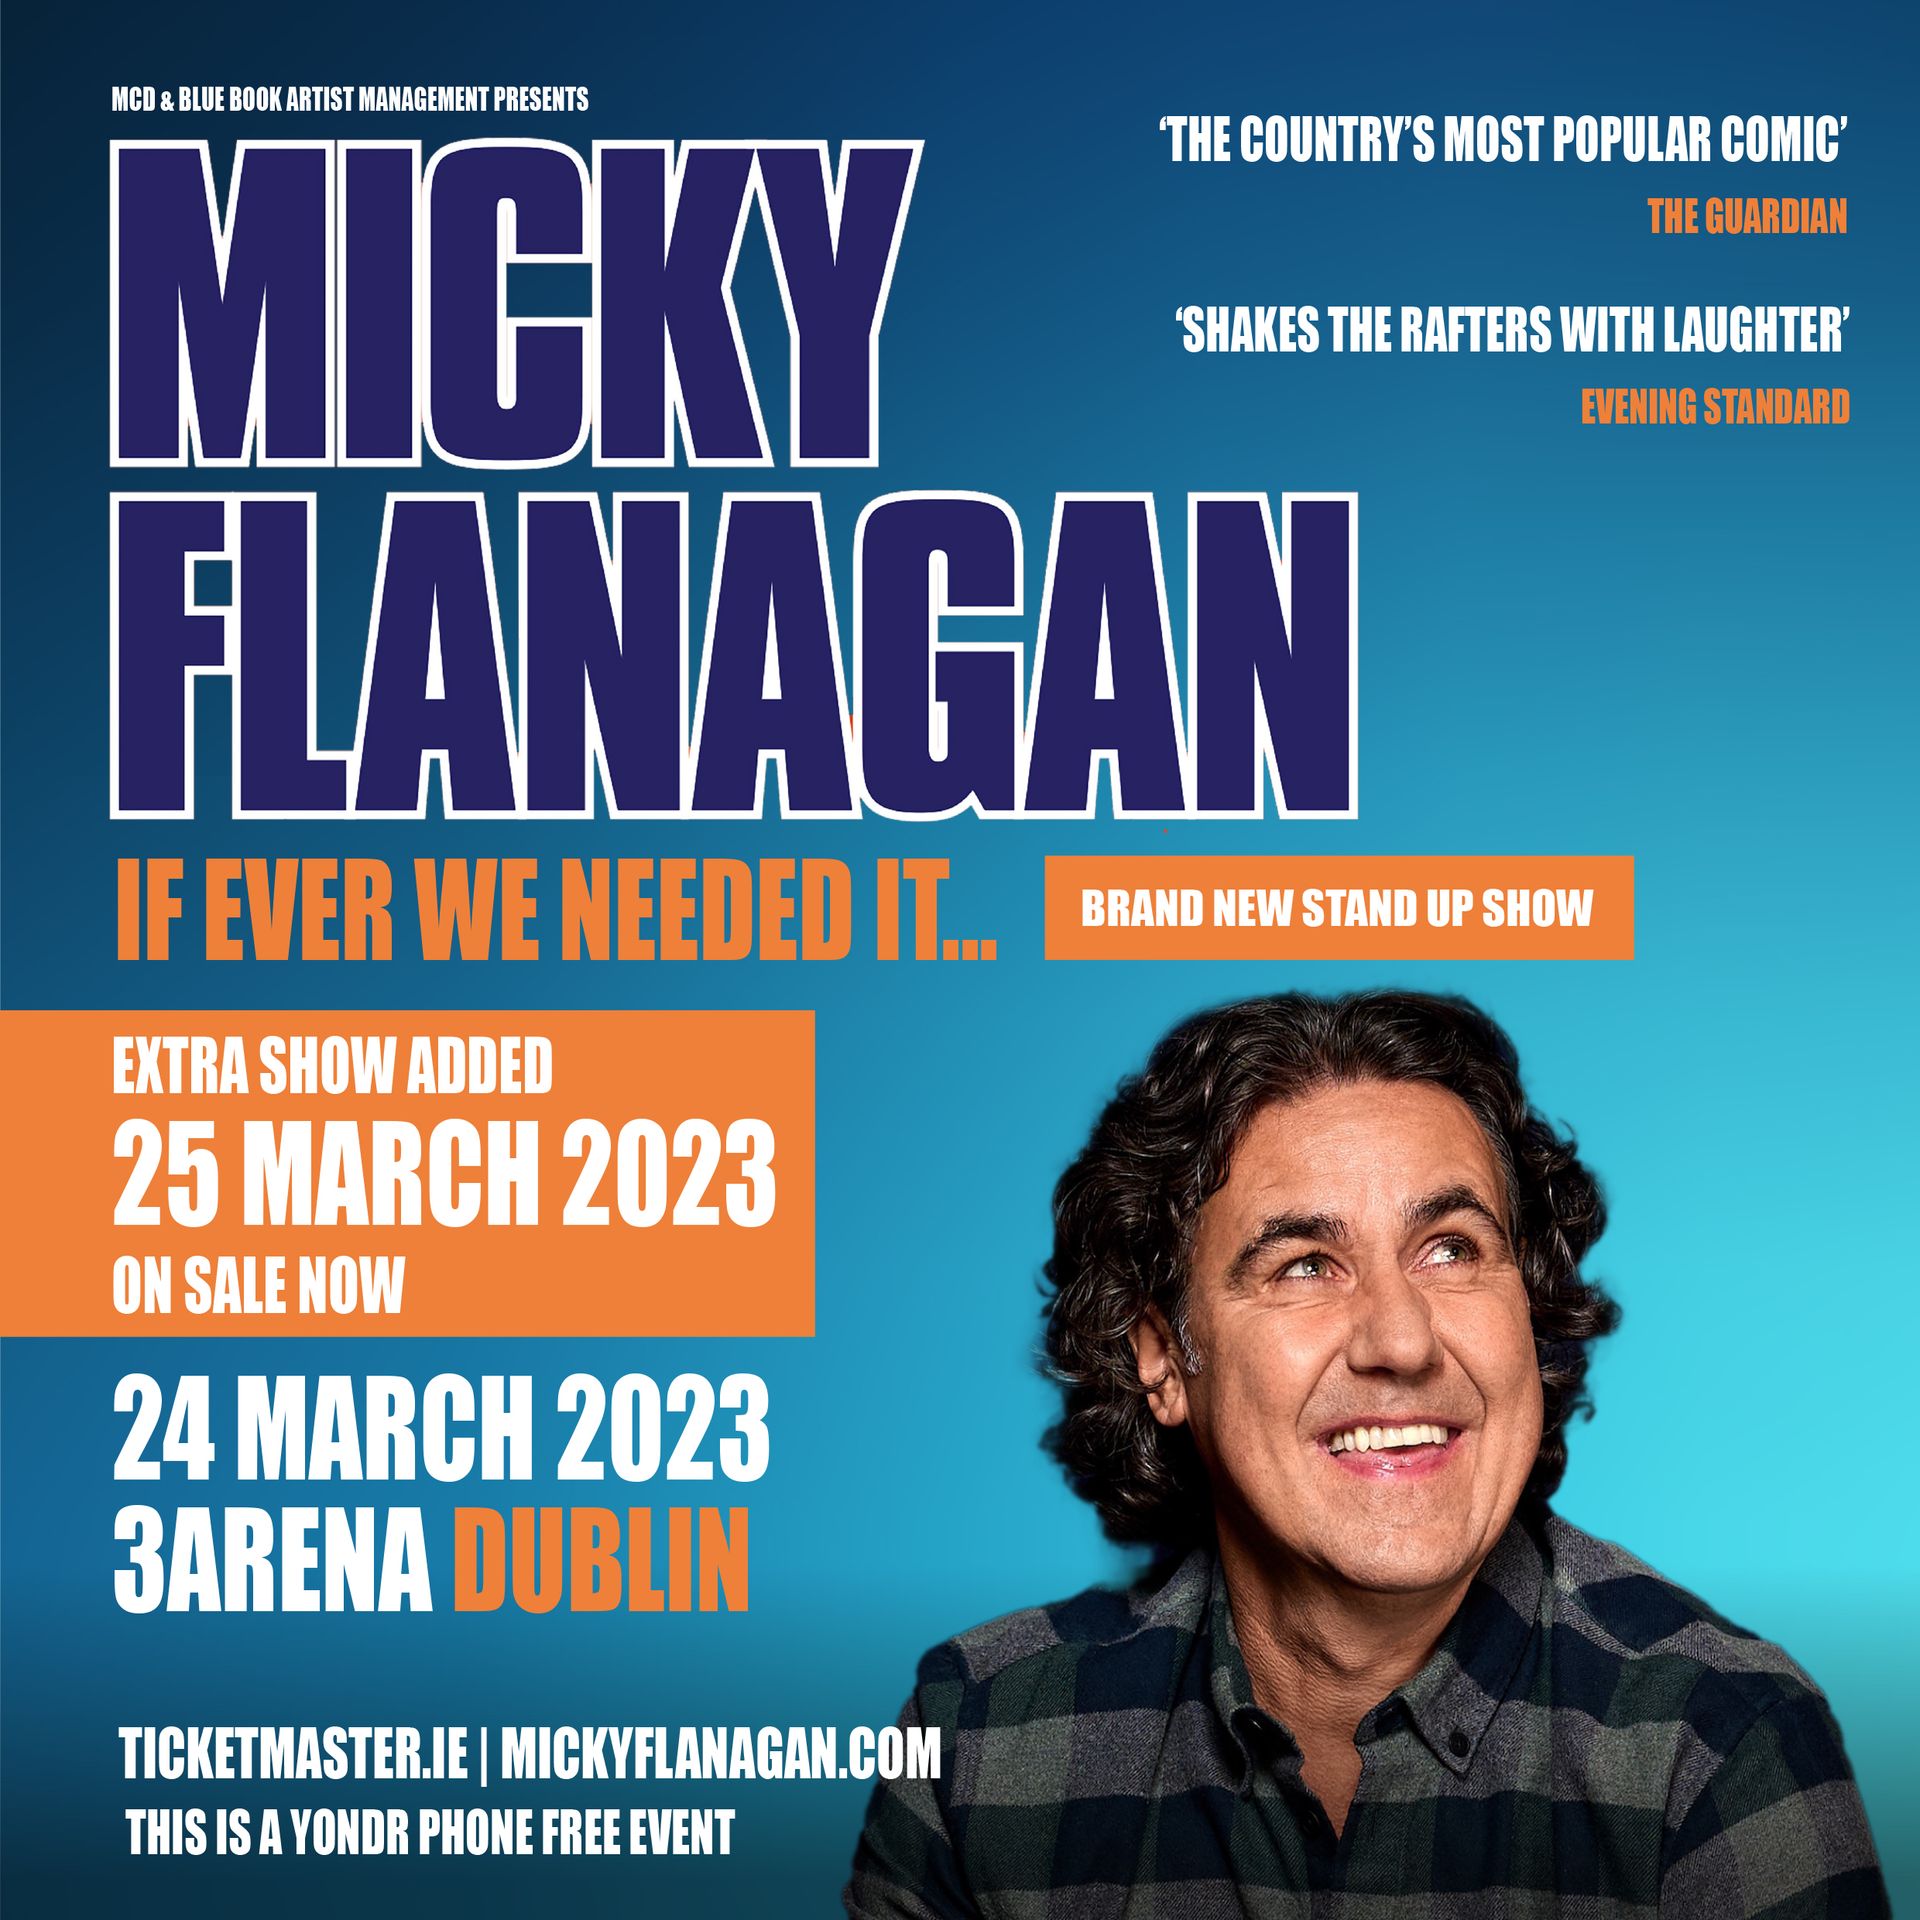 MICKY FLANAGAN   EXTRA 3ARENA DUBLIN DATE JUST ADDED     Due to demand Micky Flanagan has just added an extra date at 3Arena Dublin on Saturday 25 March 2023.   Tickets for the extra date are on sale now from www.ticketmaster.ie  Mickey will bring his brand new stand-up show If Ever We Needed It... to 3Arena Dublin on Friday 24th and Saturday 25th March 2023.   Micky’s been double busy writing the new show and it’s already proved a hit with fans, he’s even been doing matinees.  #mickyflanagan absolutely brilliant in Southend this afternoon on his warm up show - you're in for a treat ! @MickyF_Official  The boy’s as funny as hell and it's only the warm-up shows #iknowitsanemptystage  Just got back from seeing Micky Flanagan pre tour show in Blackpool. Ridiculously funny! If that's a warm-up, the tour will be hysterical!     The show covers Micky turning 60 - who’d have thought it? - as well as having sex with your glasses on, his school alumni and his ballbag. It’s fair to say it’s for over-16s.  He’s the man who gave Britain the “Out Out” phrase, which was used by Piccadilly Circus tube to put a smile on commuters’ faces as we came out out of Lockdown and went on to be used by TFL to encourage people back into theatres, restaurants and clubs.  Micky cut his comedy teeth at these clubs and it clearly paid off.  His routines online, including the Perks of Peeping, The Shits Abroad, The Crafty Cockney, The Demise of Fingering, Tomato Sauce and Chicken Children, have been viewed in the hundred millions, and are a huge hit on TikTok. He keeps us laughing through the tough times – and if ever we needed it, it’s now!     ‘Shakes the rafters with laughter’ Evening Standard ‘The country’s most popular comic’ The Guardian  ‘On the form of his life’ The Times      Micky Flanagan  Friday 24 March  EXTRA DATE - SATURDAY 25 MARCH  3Arena Dublin     Tickets on sale now  From Ticketmaster www.ticketmaster.ie      www.mcd.ie  www.3arena.ie